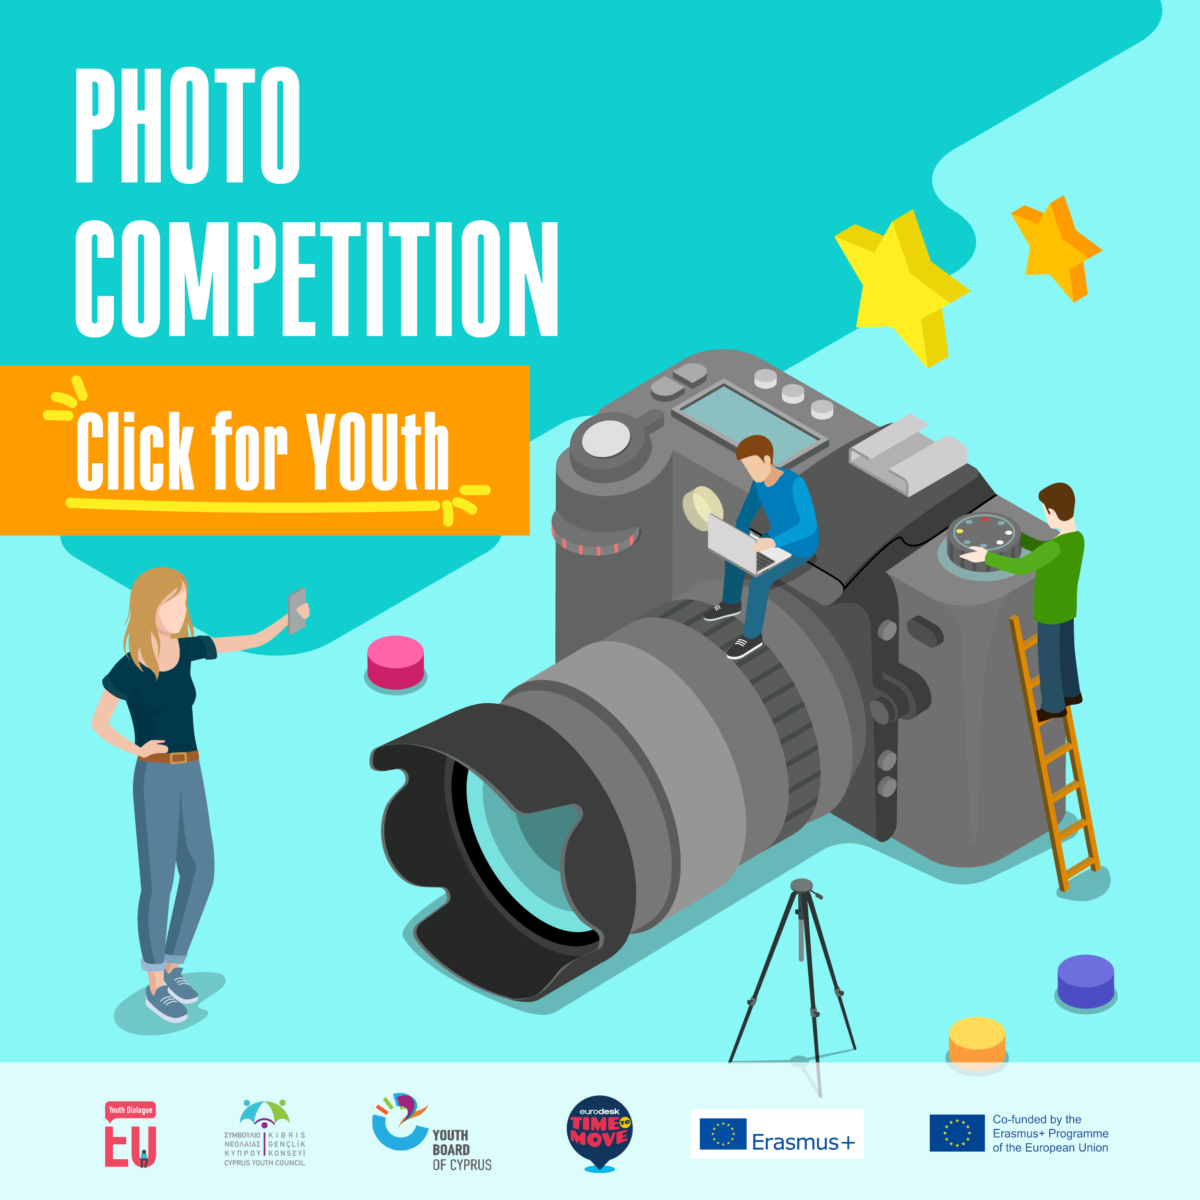 The winners of the photo competition “Click for YOUth” received their prizes!